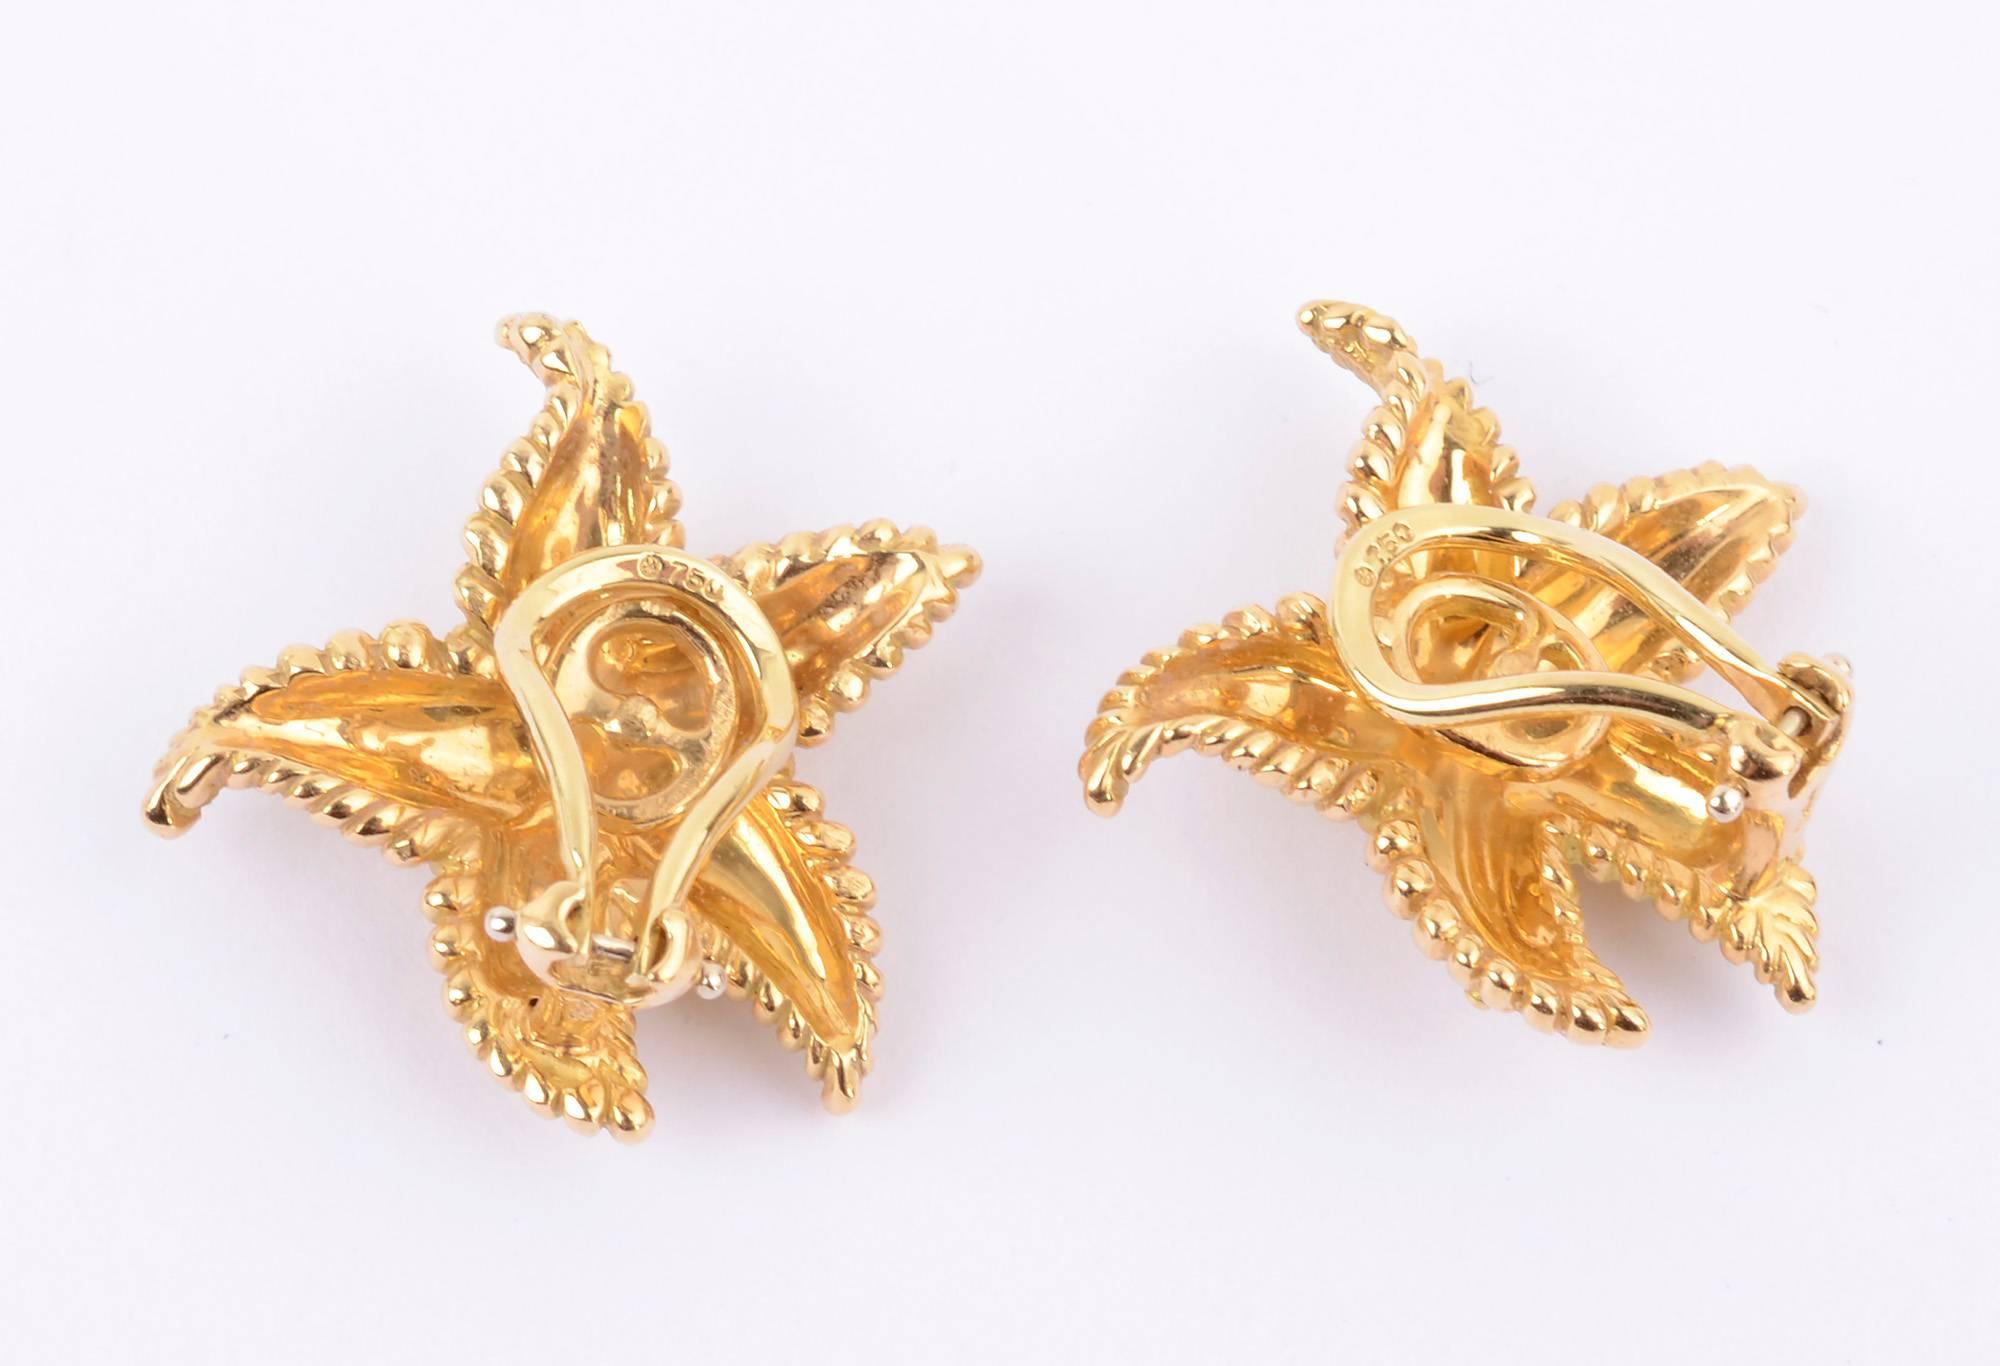 Tiffany eighteen karat gold Starfish earrings that are wonderfully sculptural. In addition, they have finely detailed texture. The earrings measure 1 1/16 inches wide and  tall. Clip backs can easily be converted to posts.